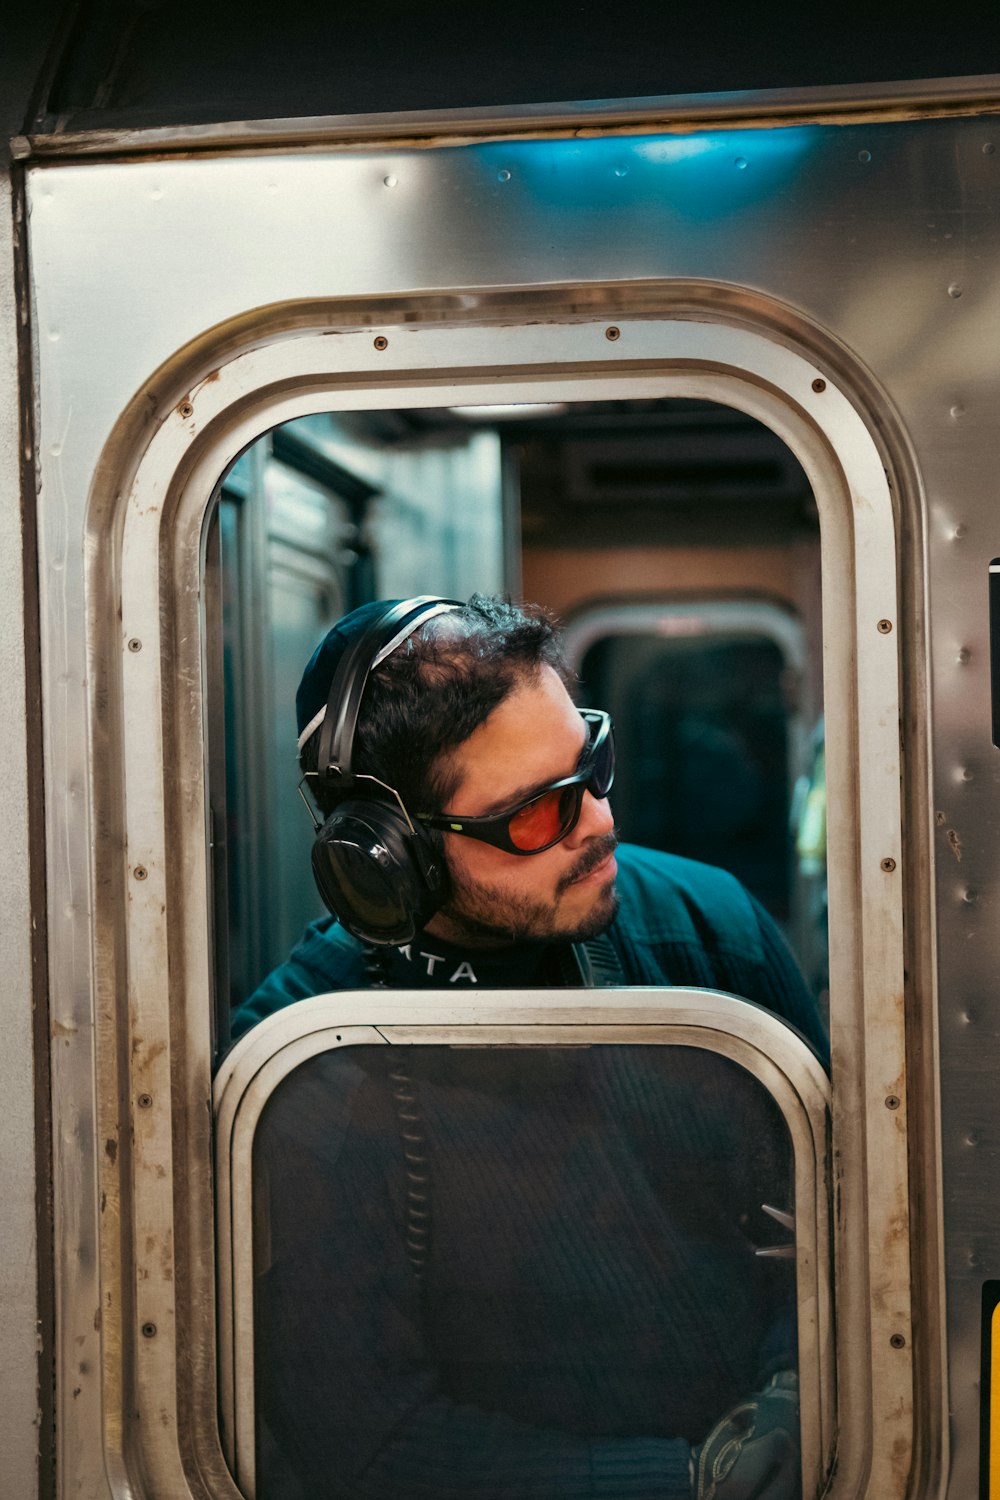 a man wearing headphones looking out the window of a train